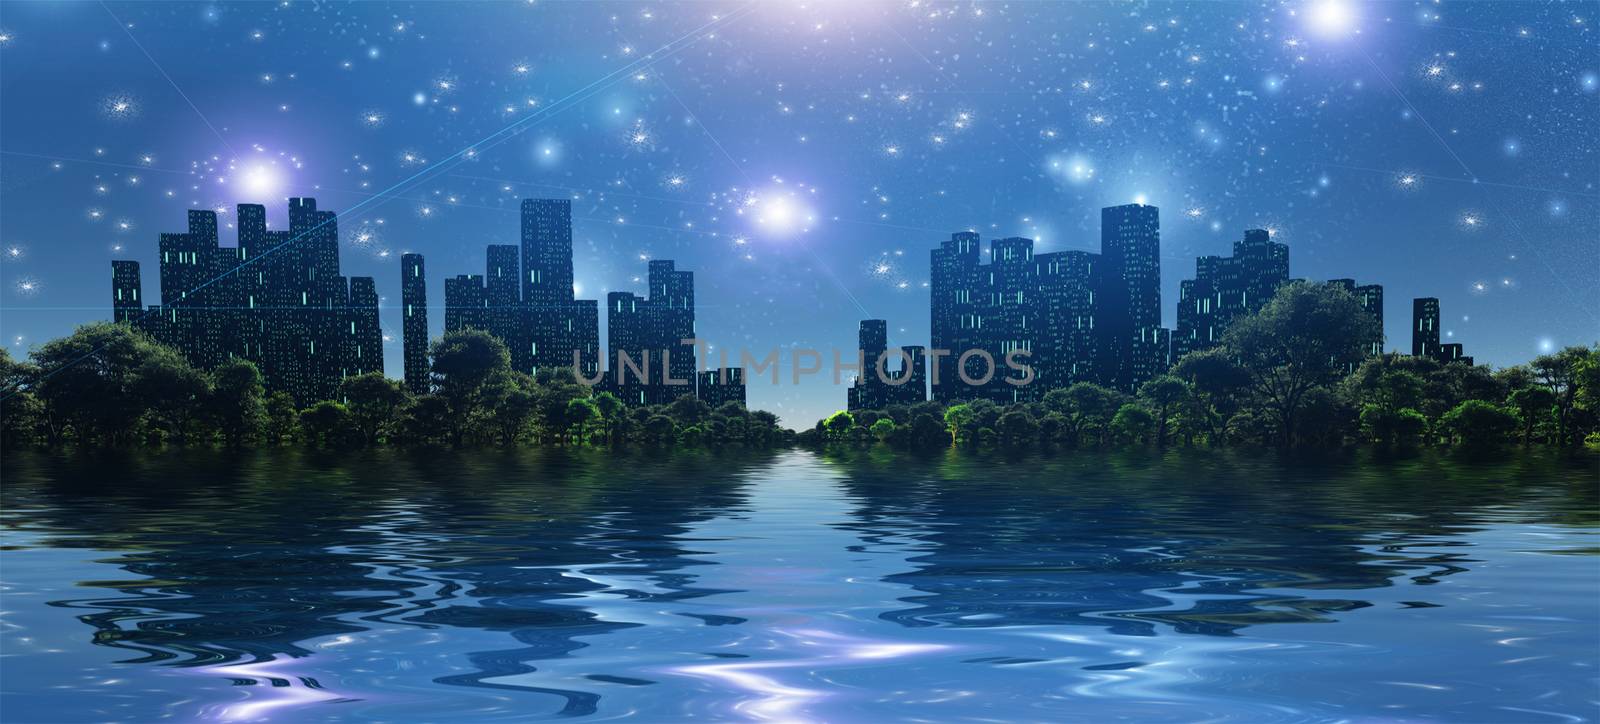 Surreal digital art. City surrounded by green trees in water world. Bright stars in the sky